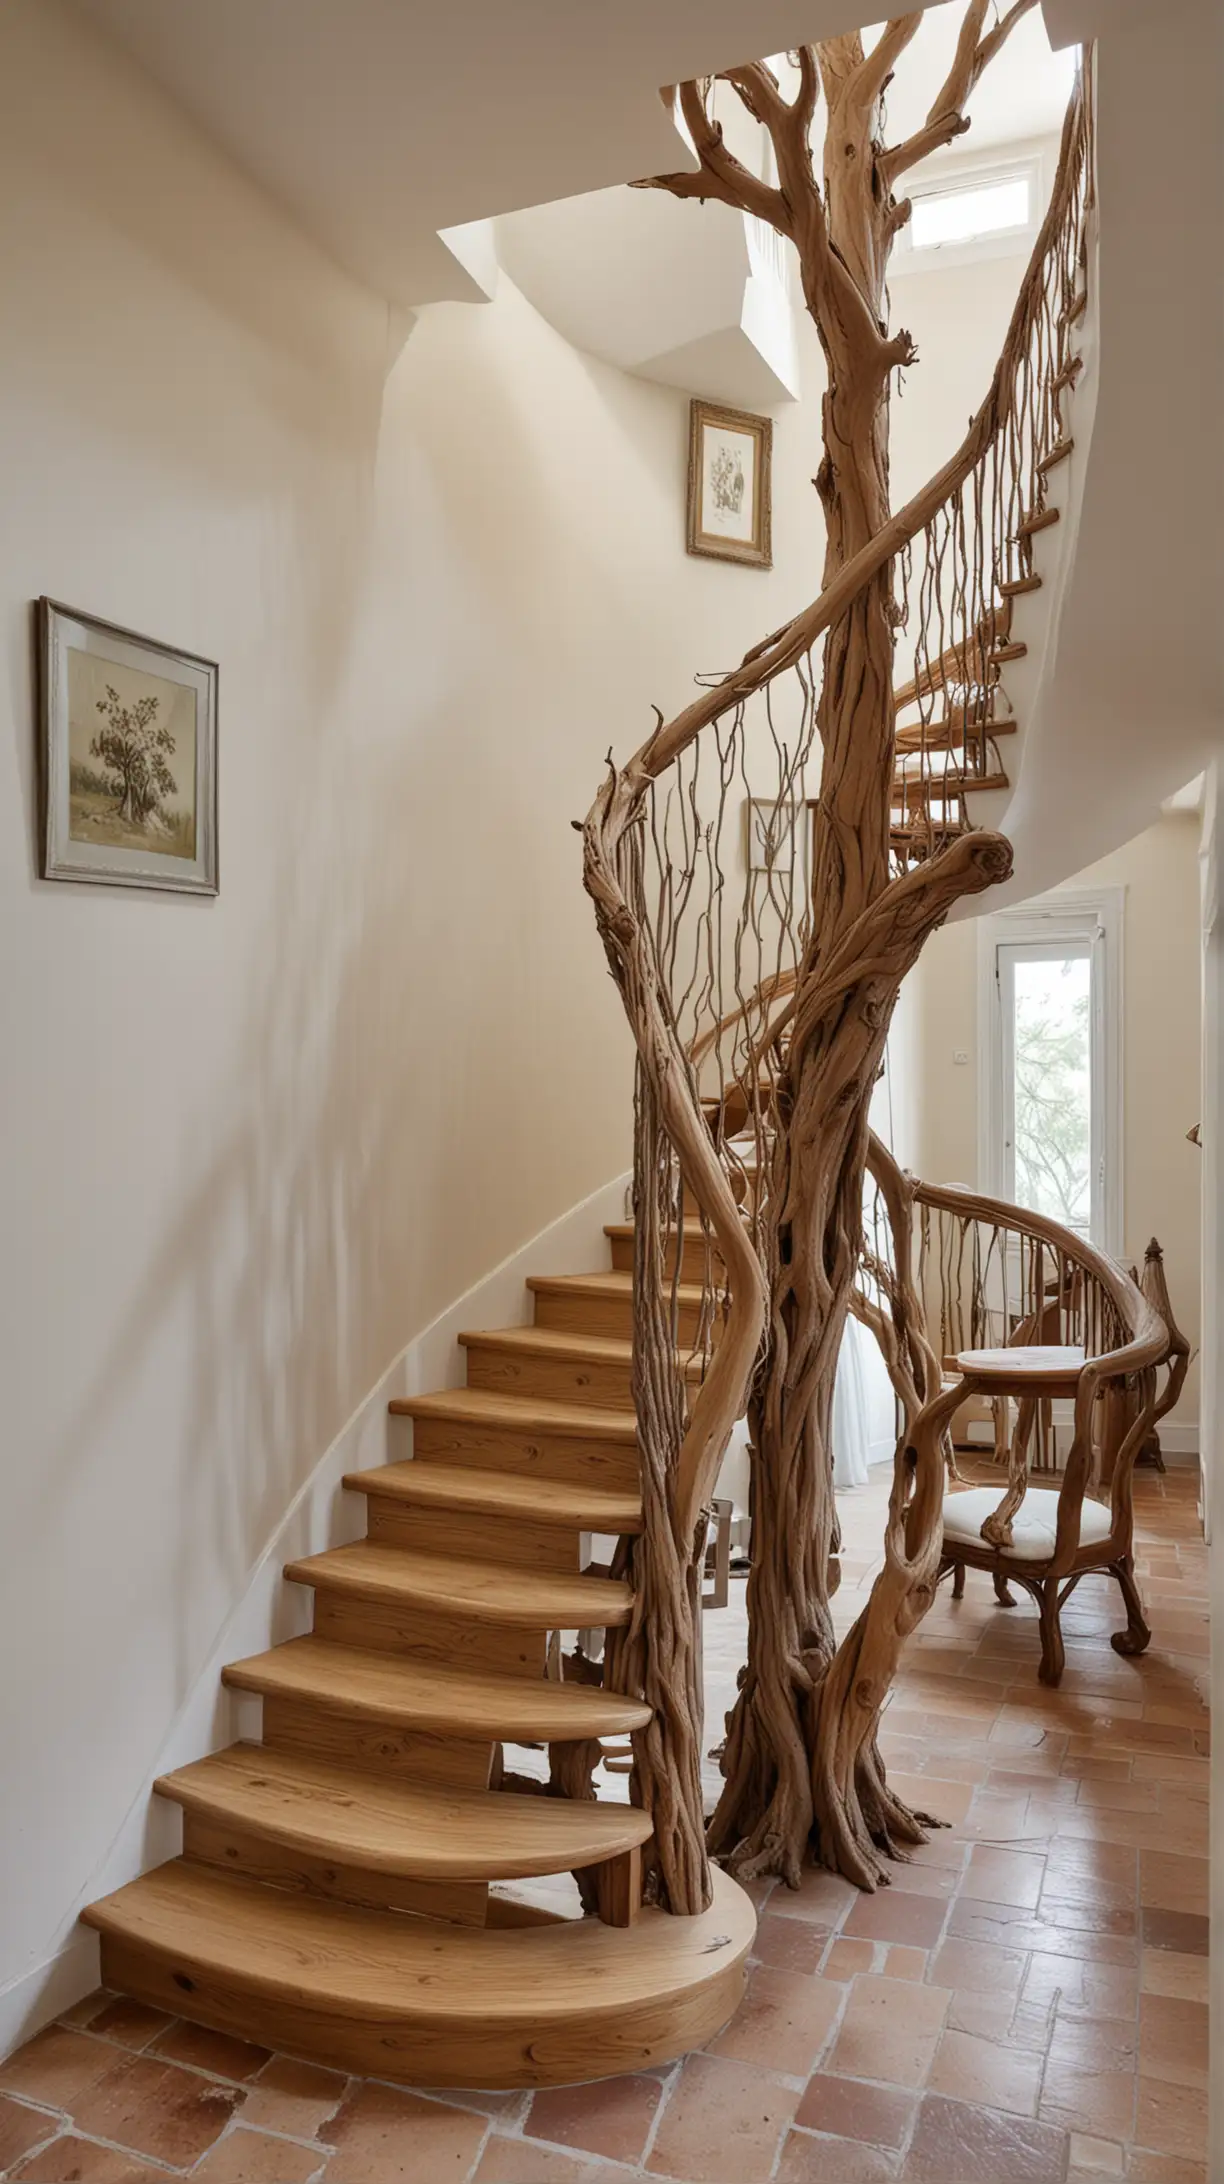 Charming House with Twisted Tree Staircase